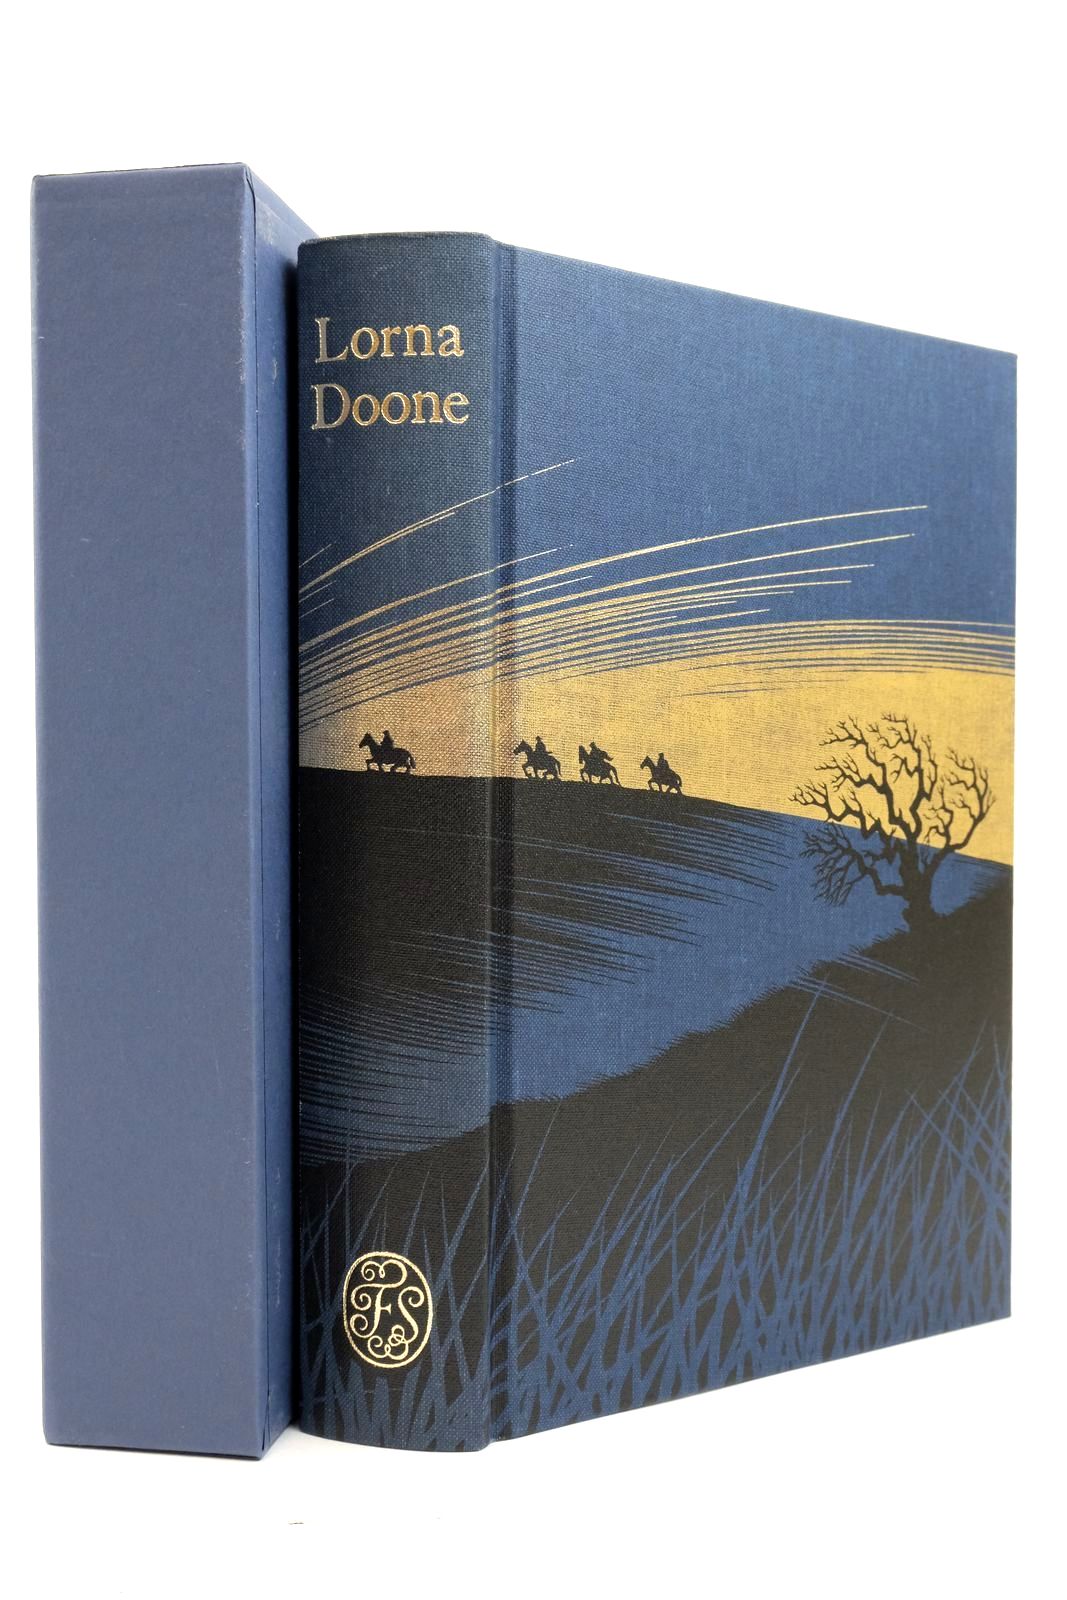 Photo of LORNA DOONE written by Blackmore, R.D. illustrated by Rooney, David published by Folio Society (STOCK CODE: 2138218)  for sale by Stella & Rose's Books